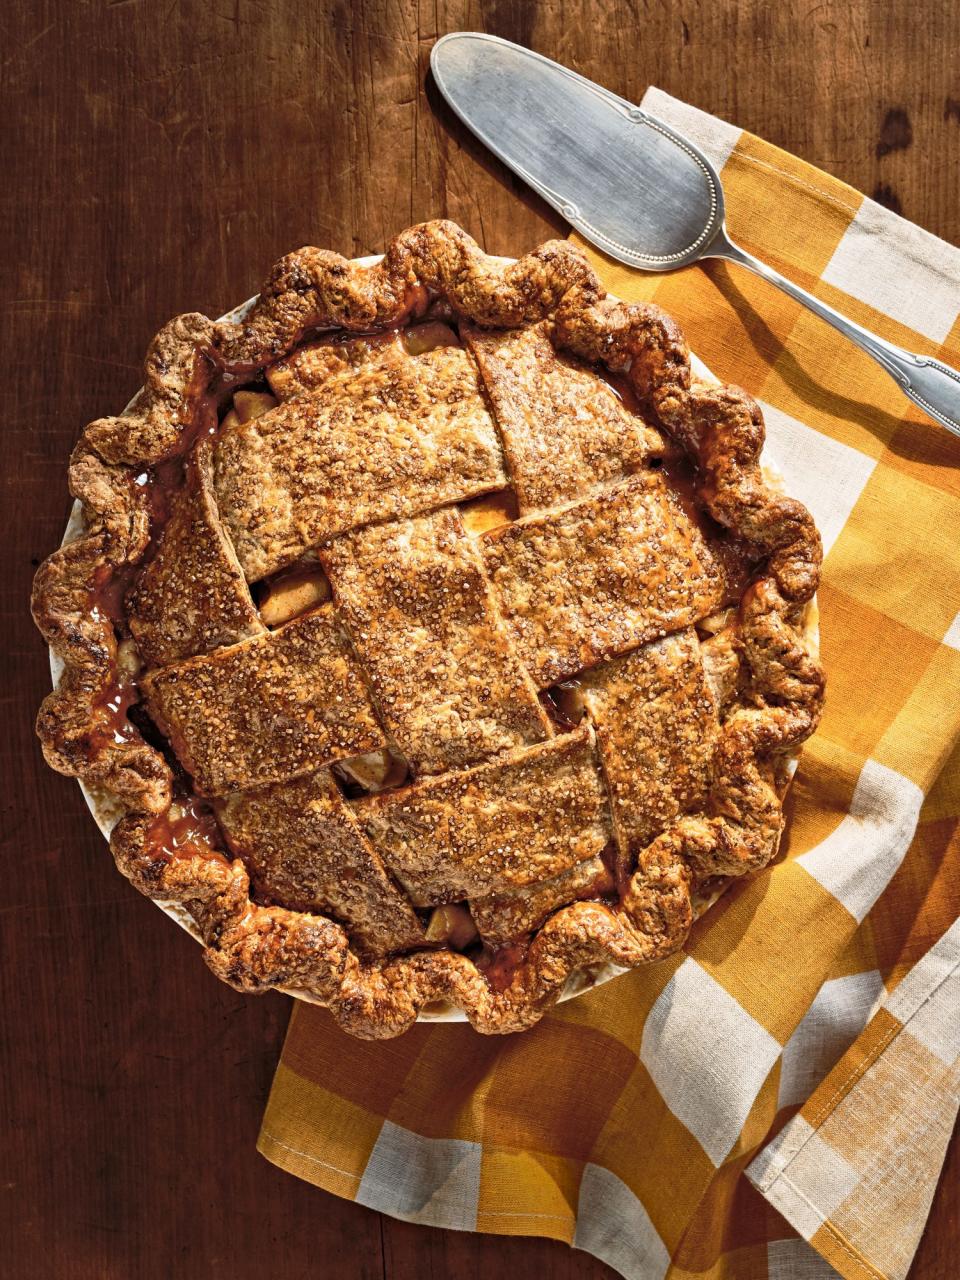 Apple Pie with Rye Crust and Cider Caramel